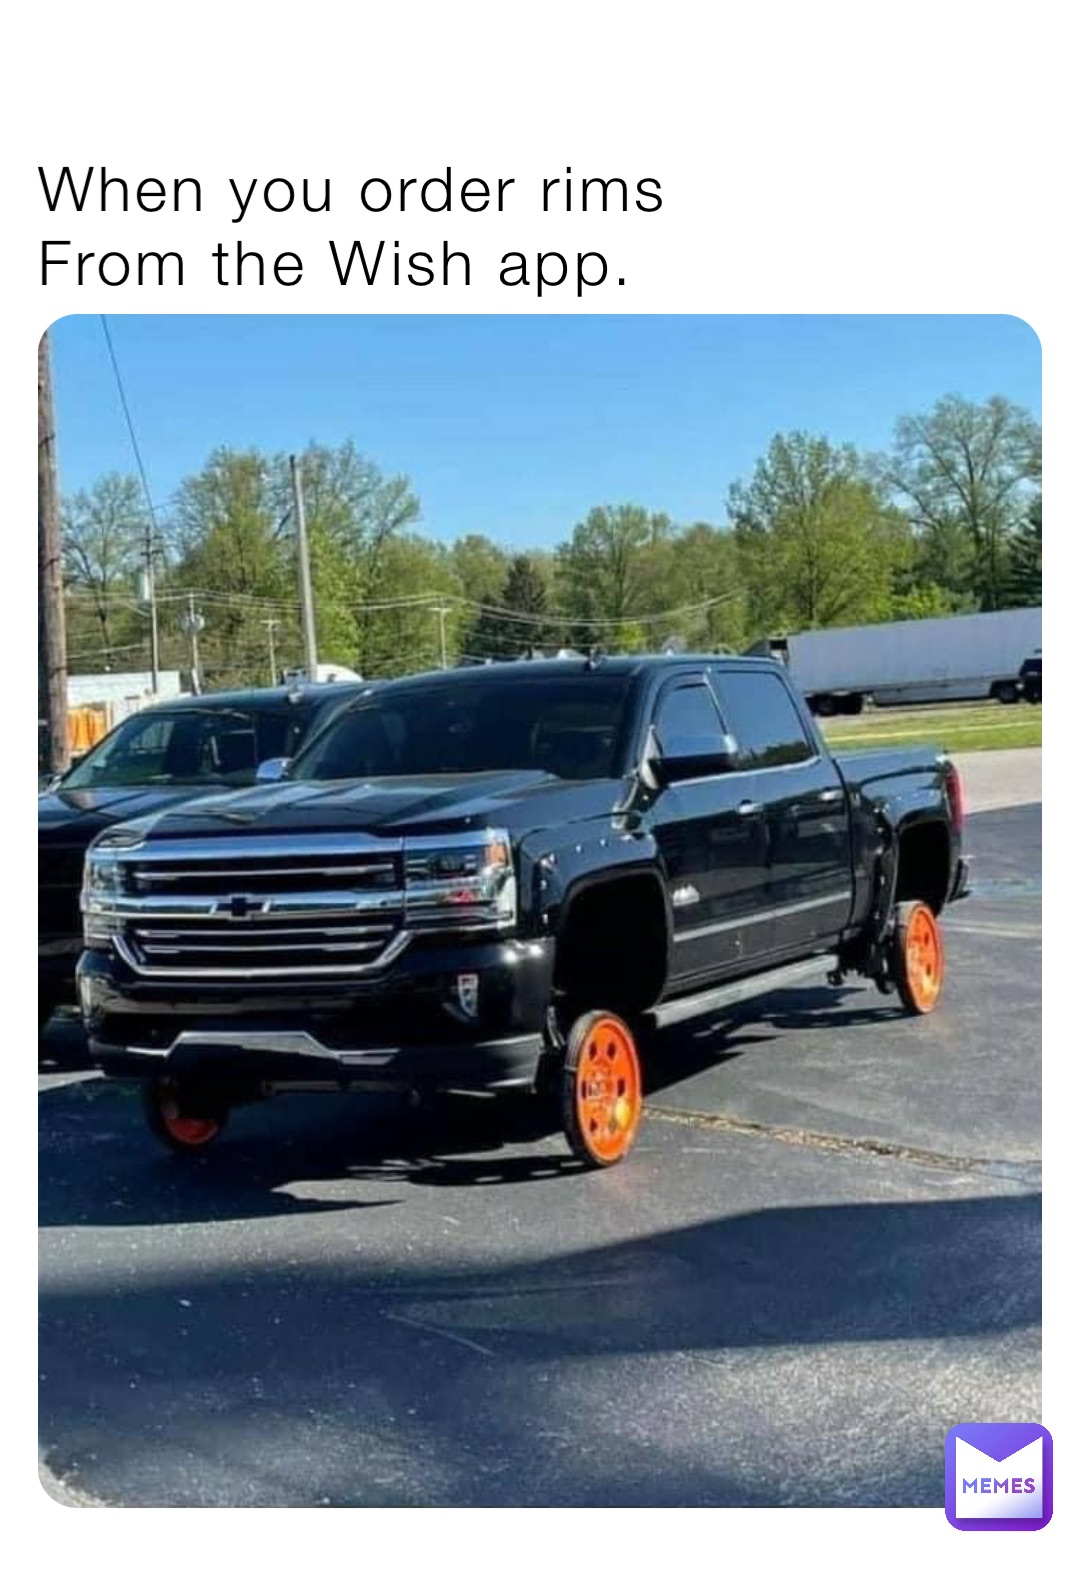 When you order rims
From the Wish app.